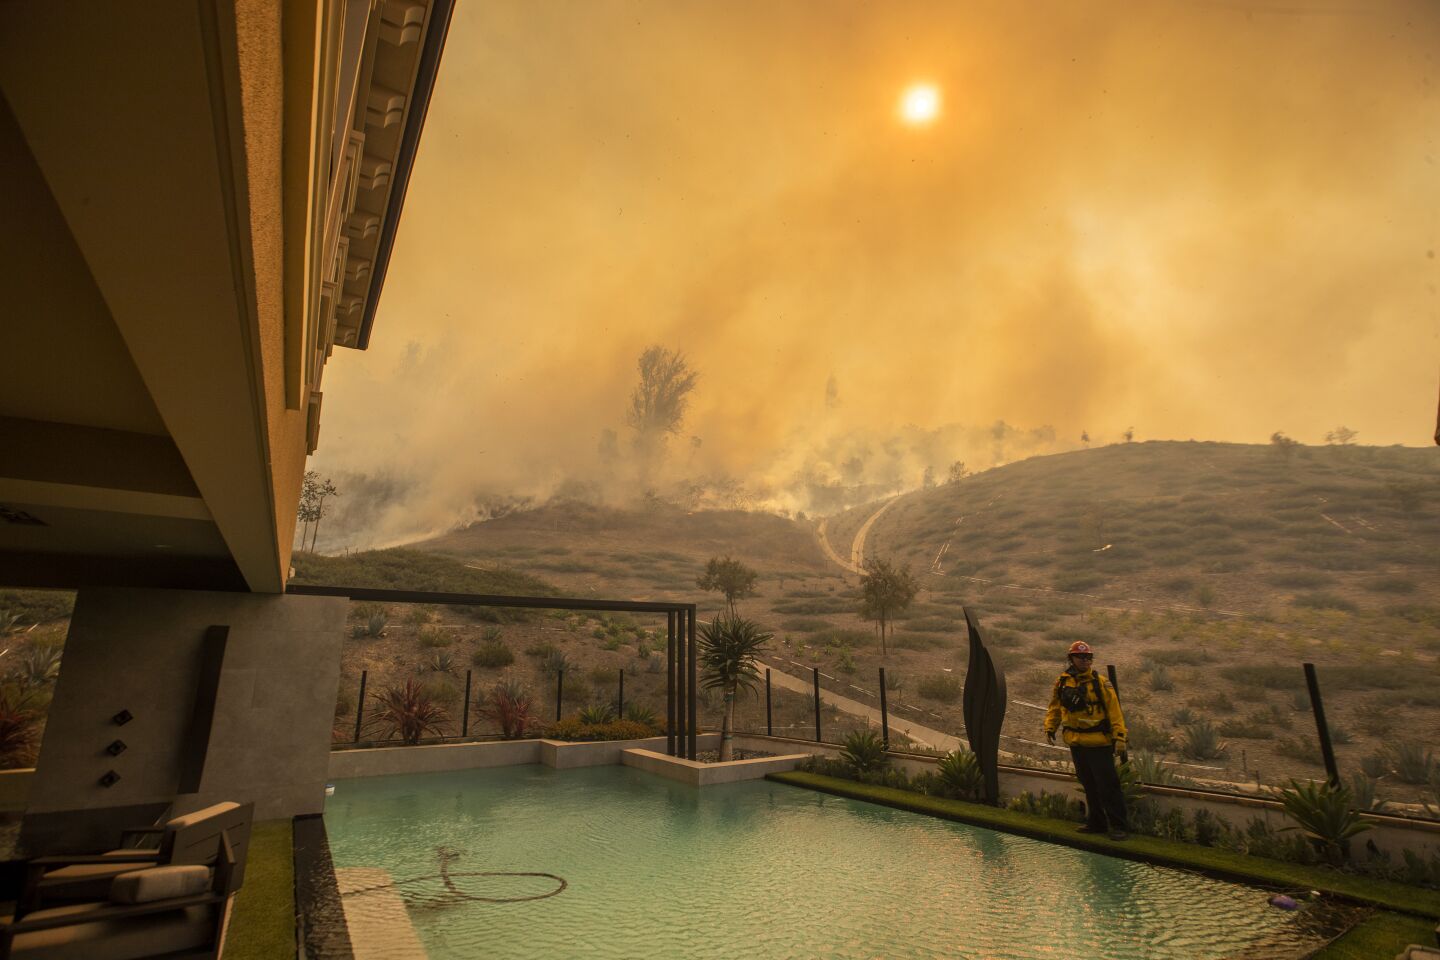 An Orange County Fire Authority firefighter stands ready to defend a home as the Silverado fire approaches in Irvine.